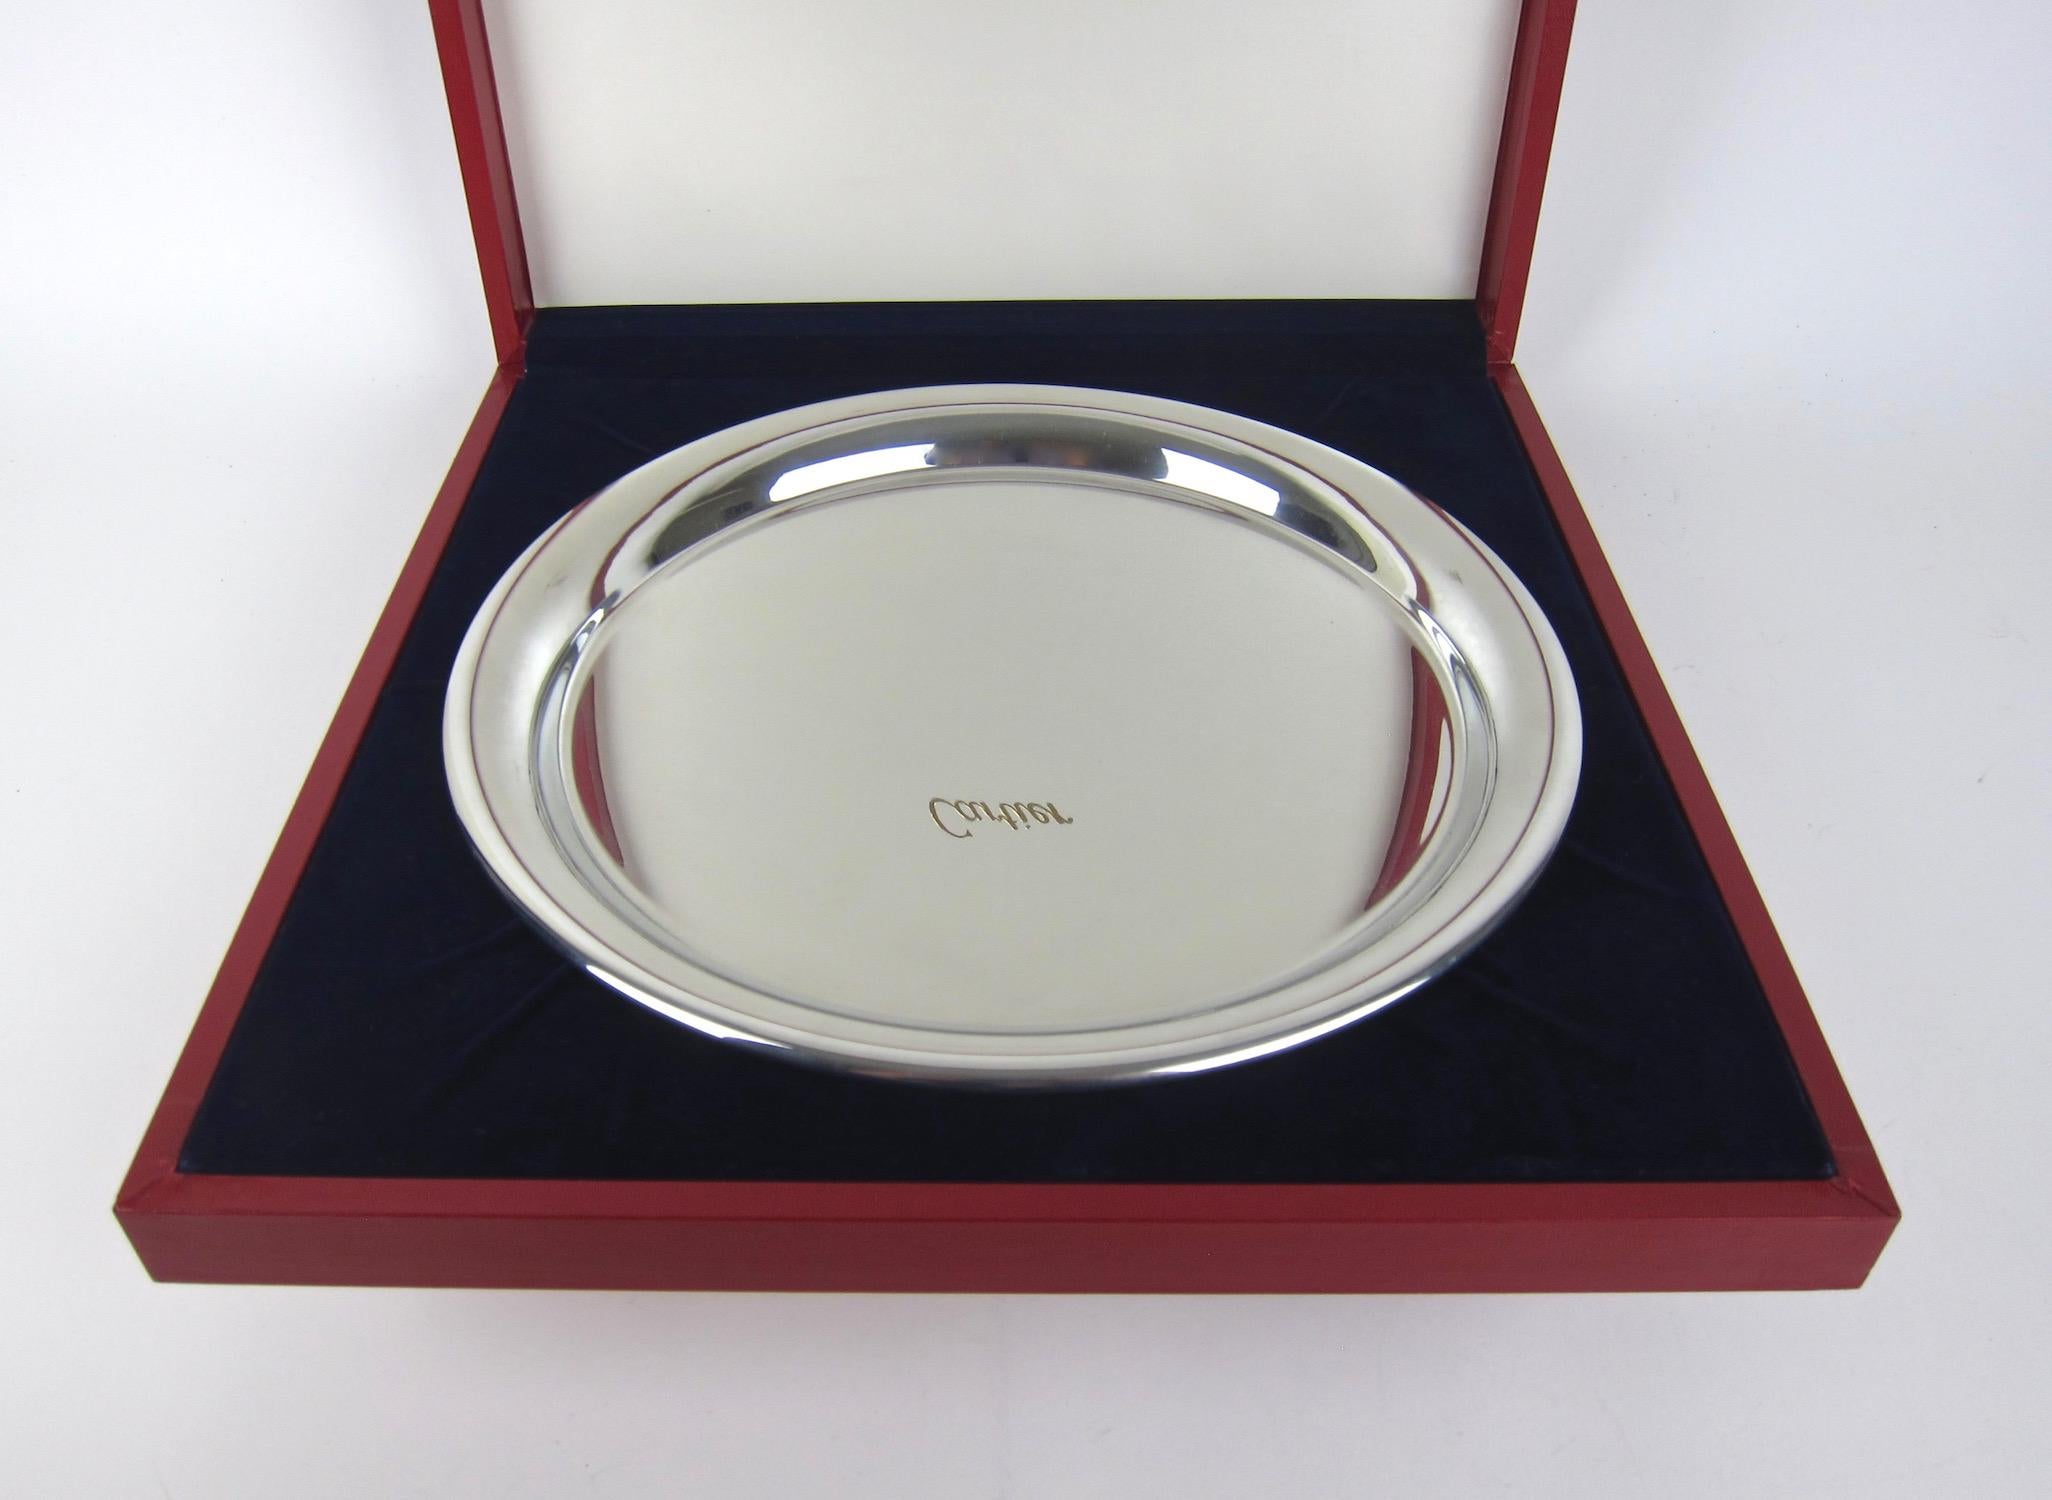 An elegant vintage Cartier silver serving tray in highly polished pewter, made in France, circa 1977. The round tray has a modern, Minimalist design with a wire-wrapped rim, stamped 